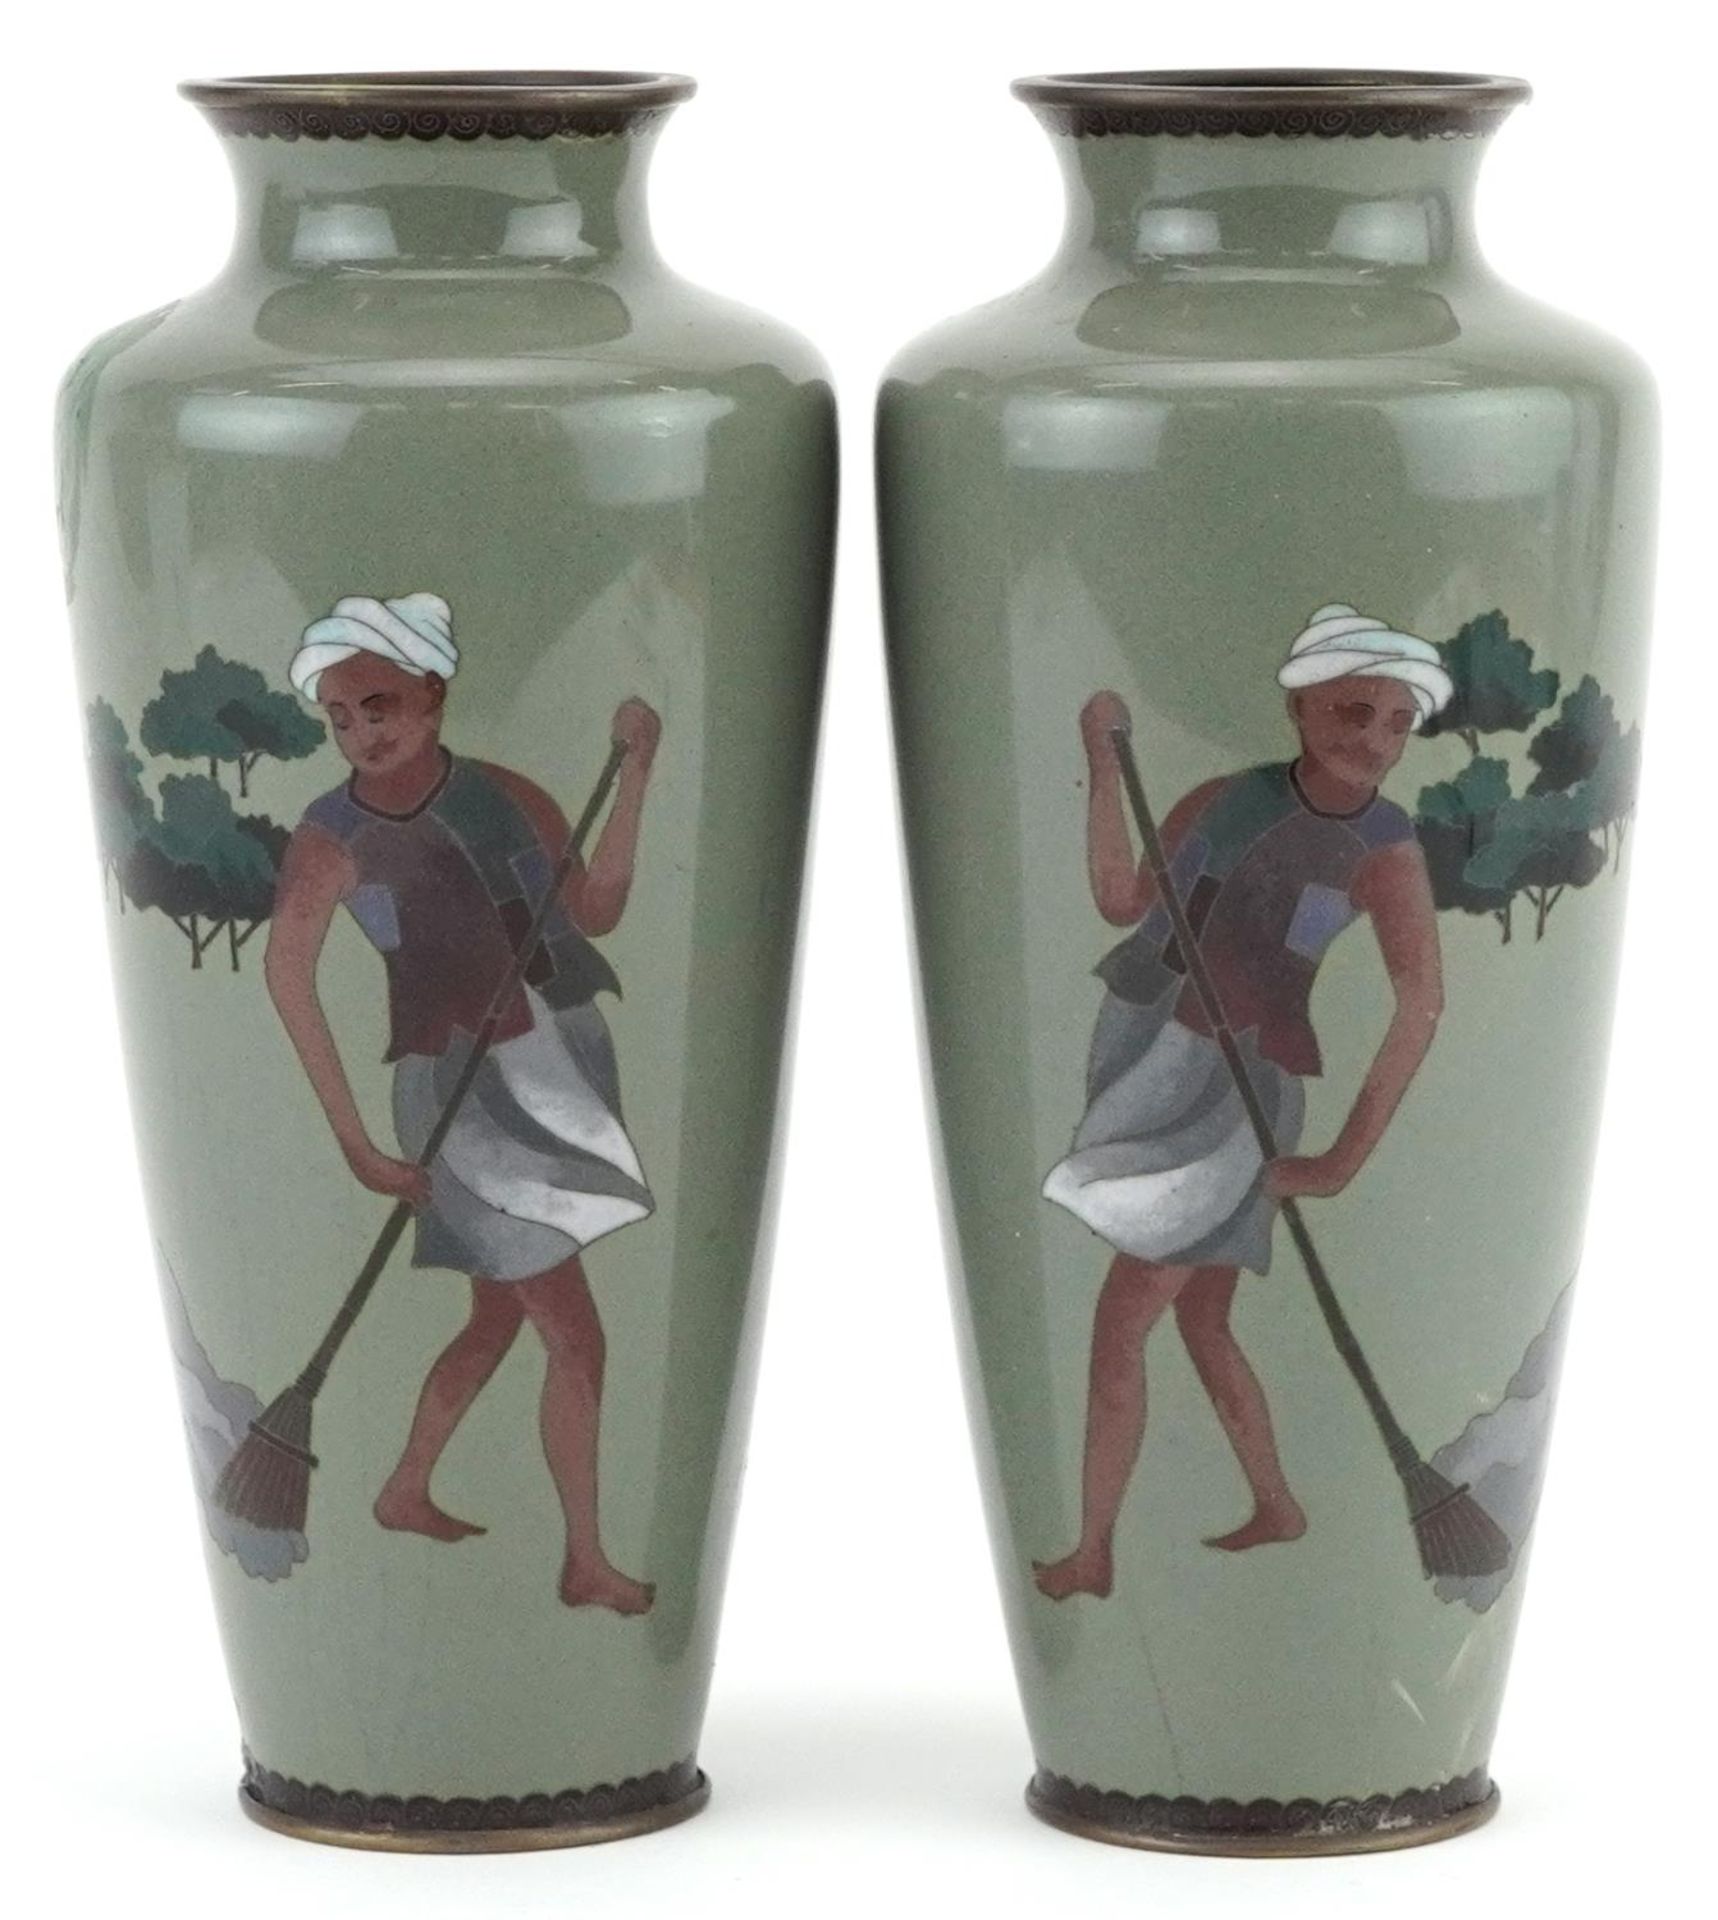 Pair of Japanese cloisonne vases, each enamelled with a man sweeping, each 19cm high